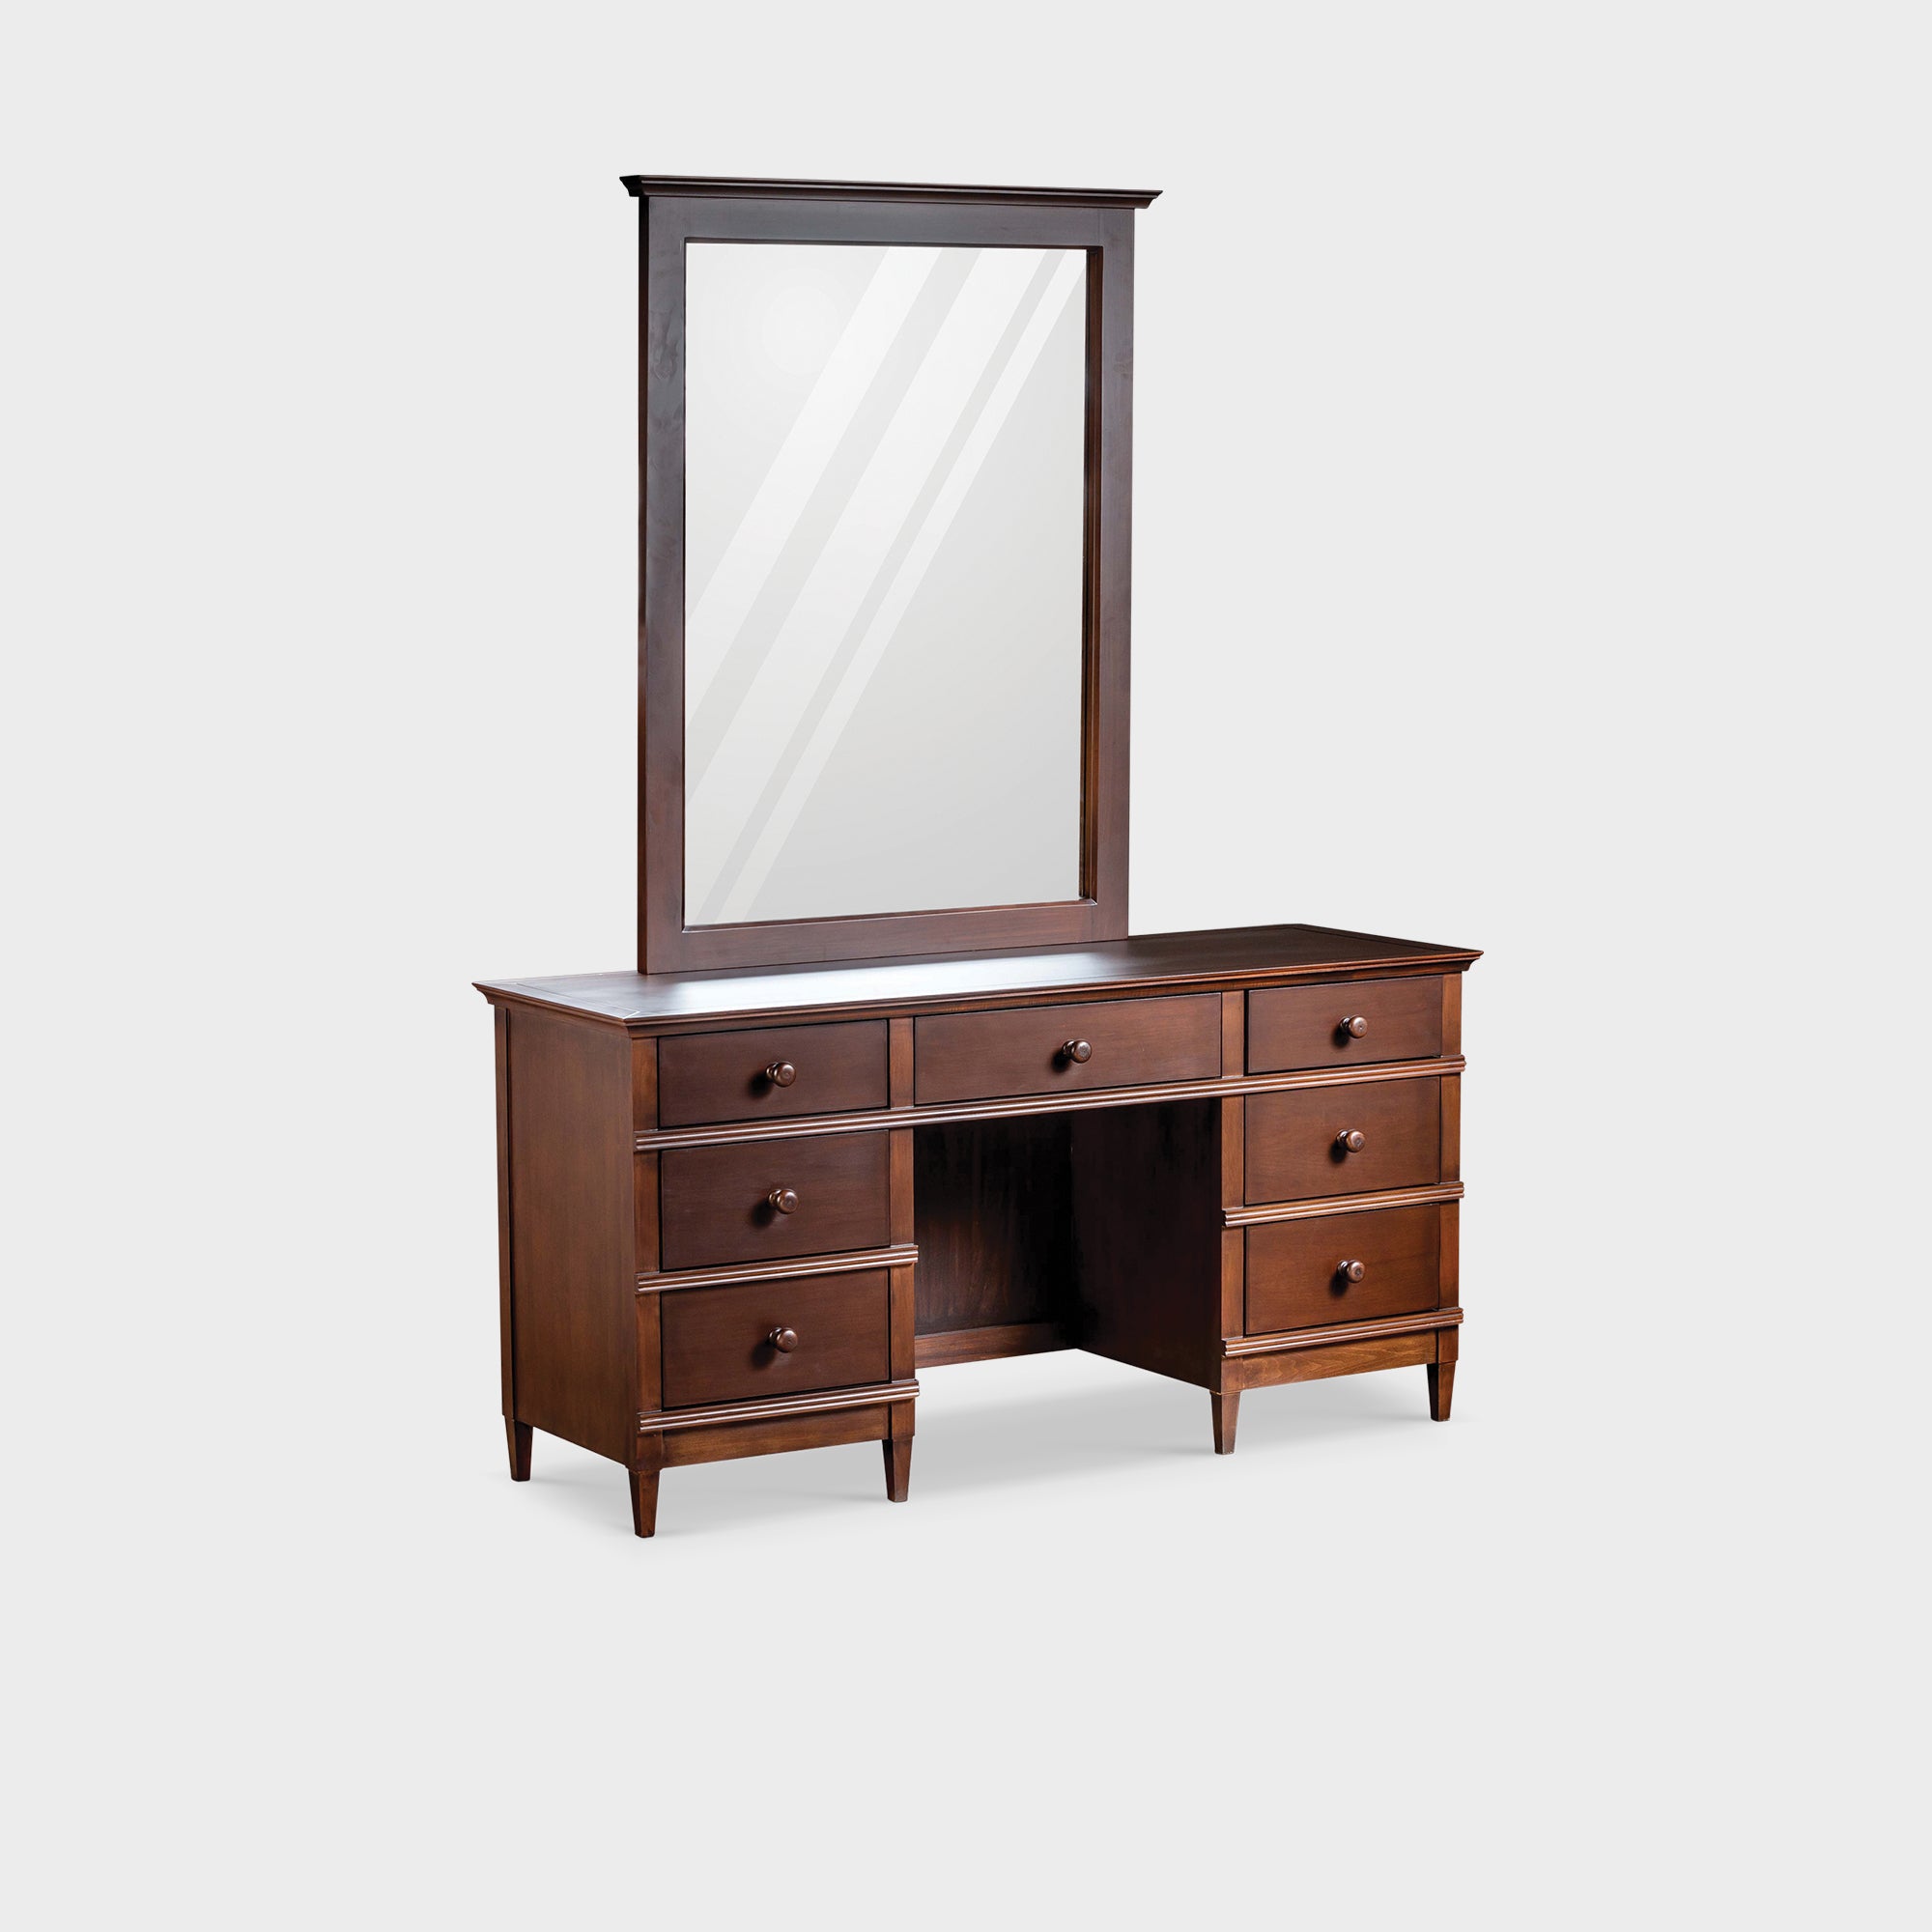 ORCHARD DRESSER TABLE WITH MIRROR